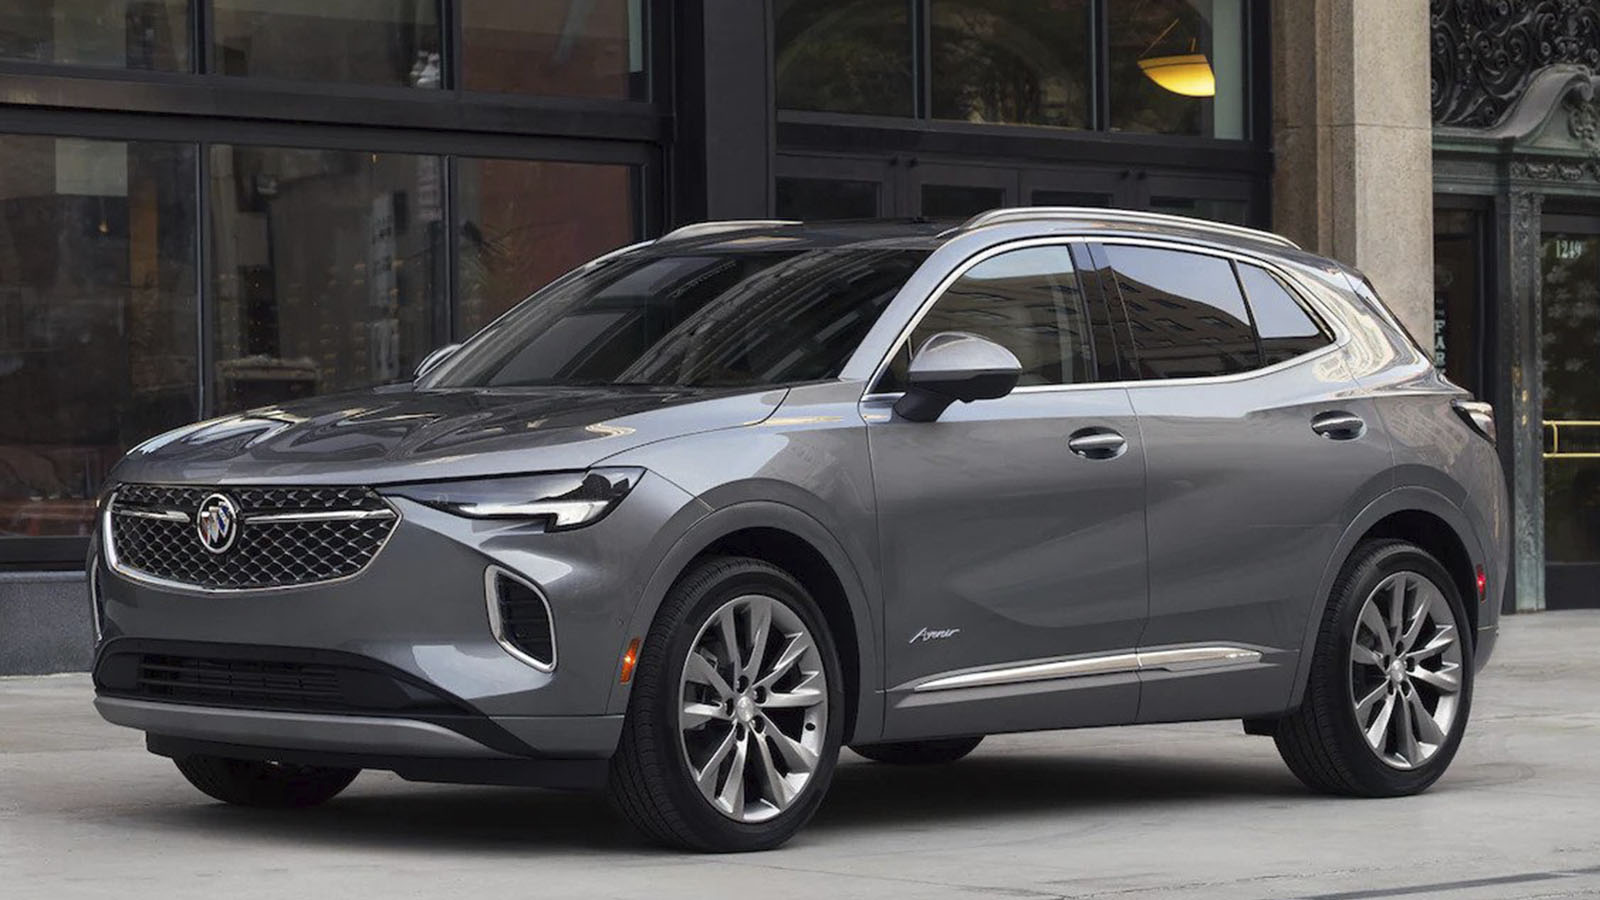 2022 grey Buick Envision SUV on city street